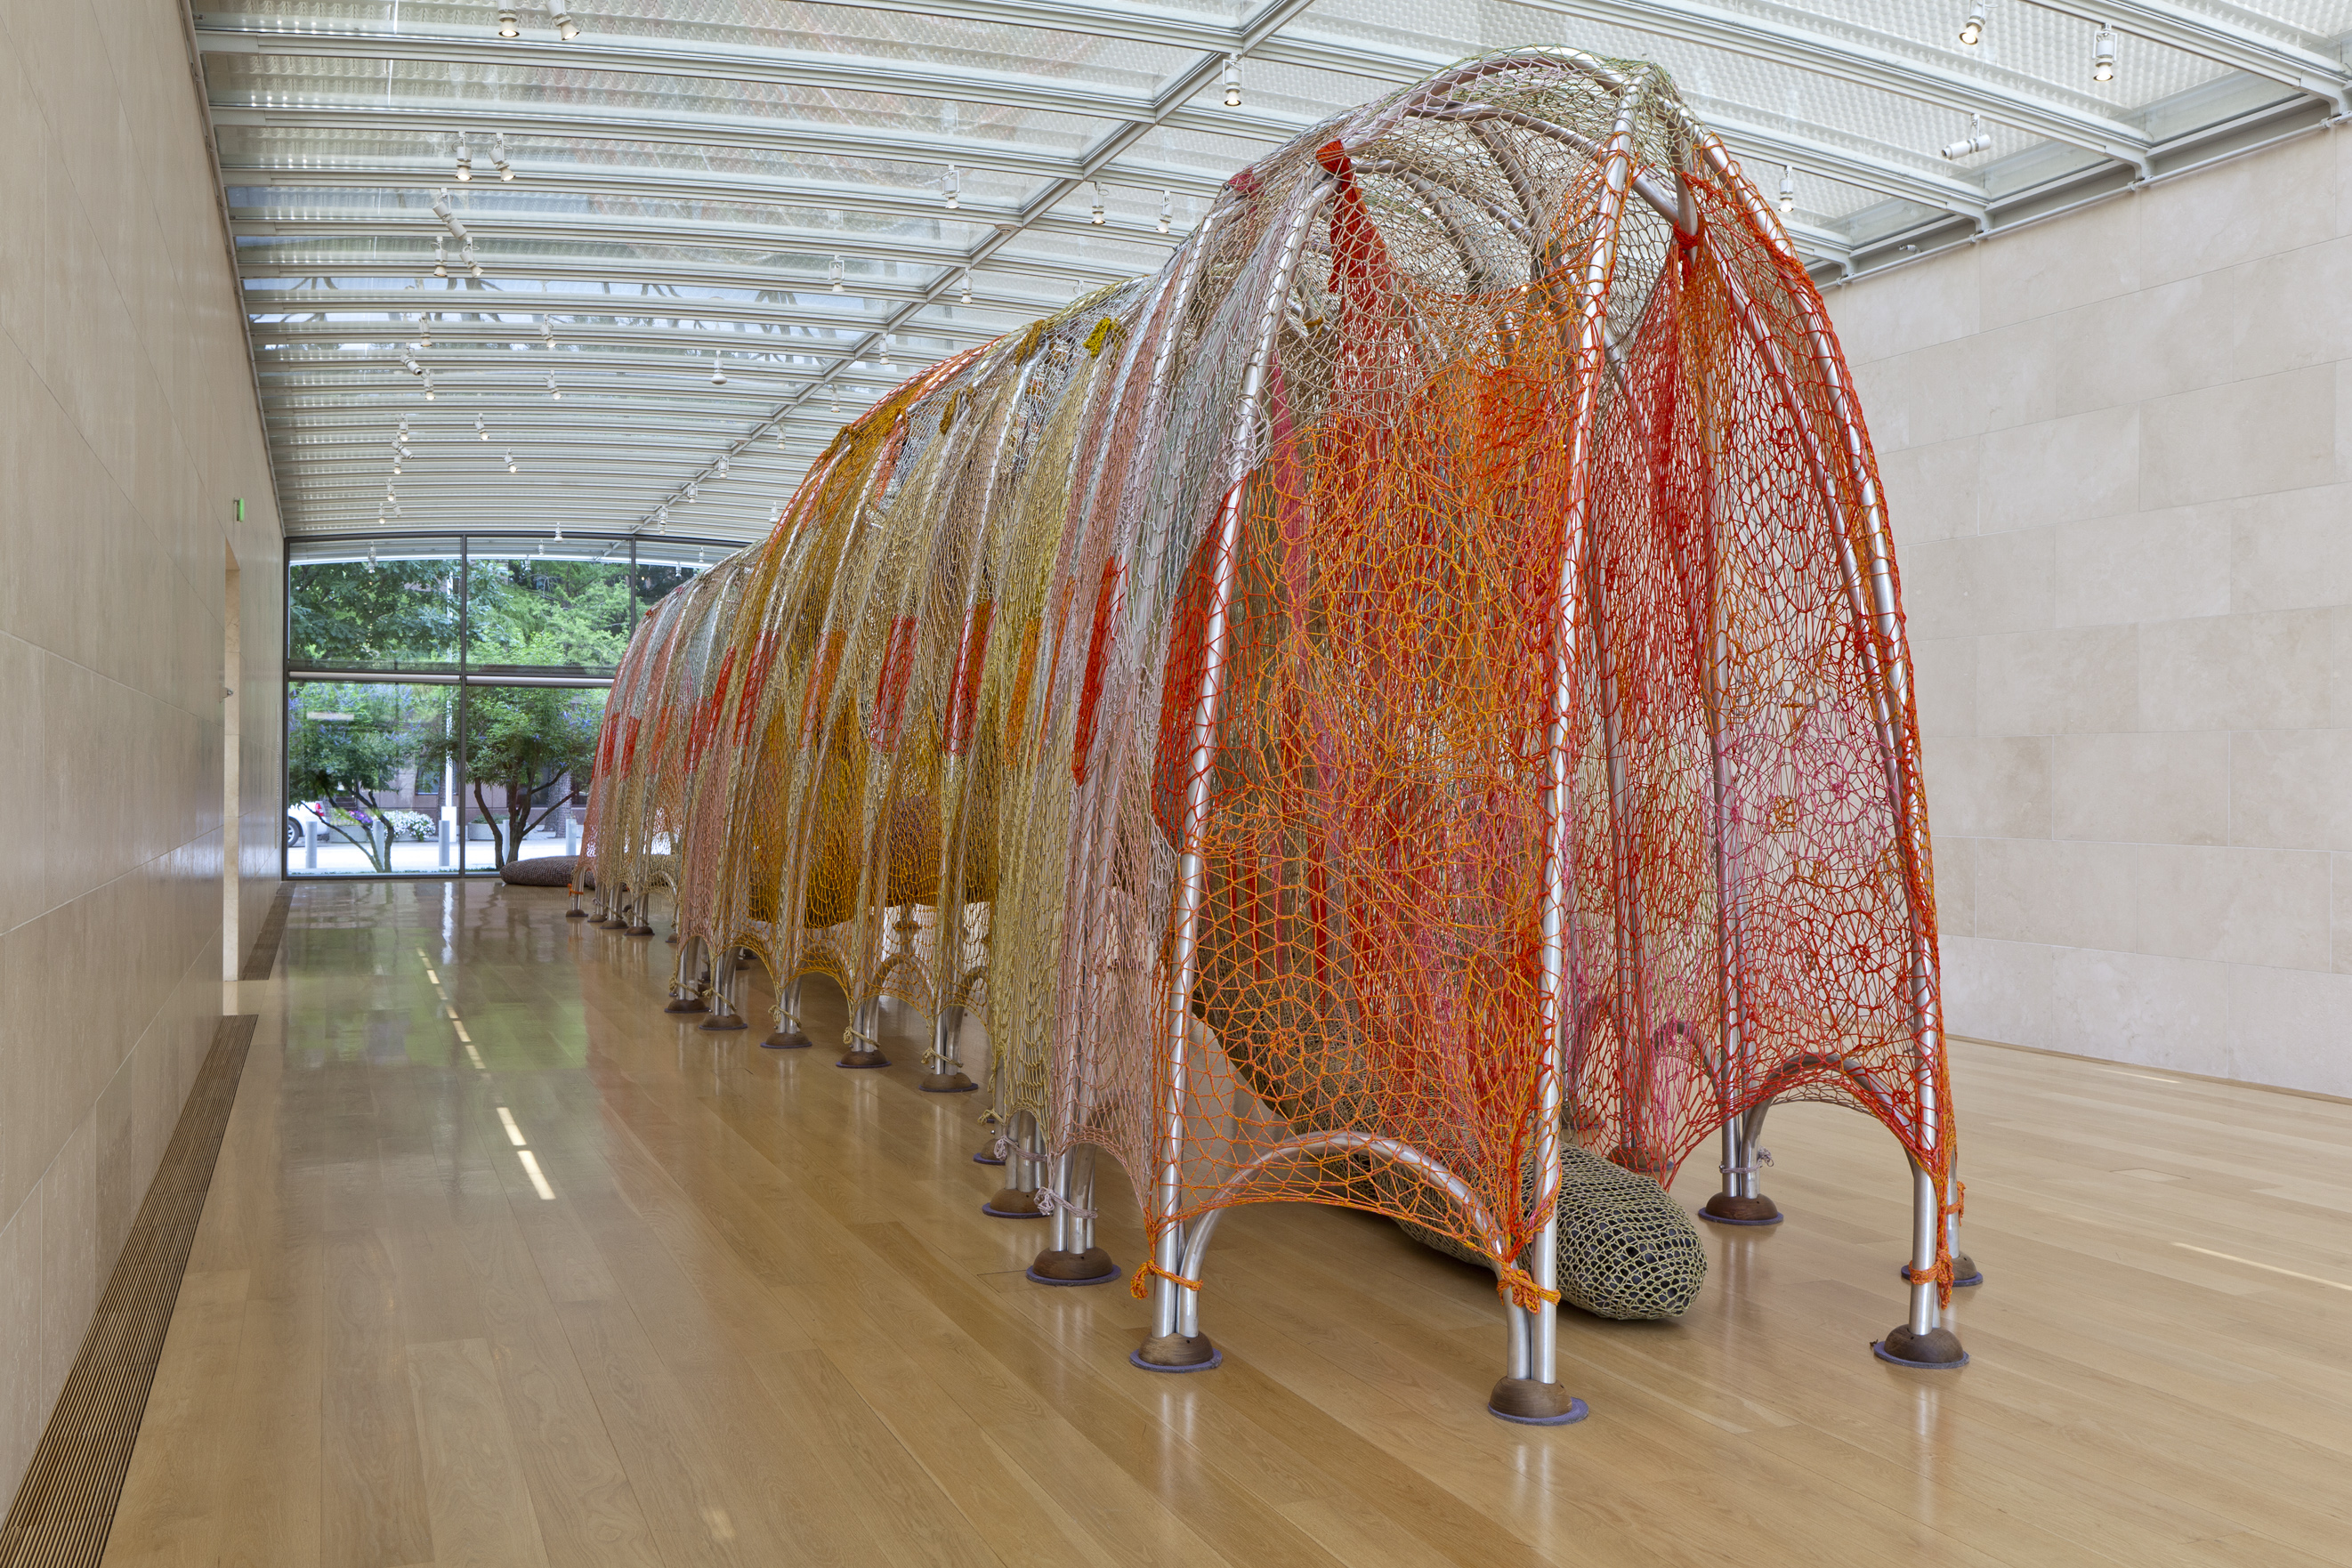 Ernesto Neto’s work is meant to awaken our primal selves by inviting interaction